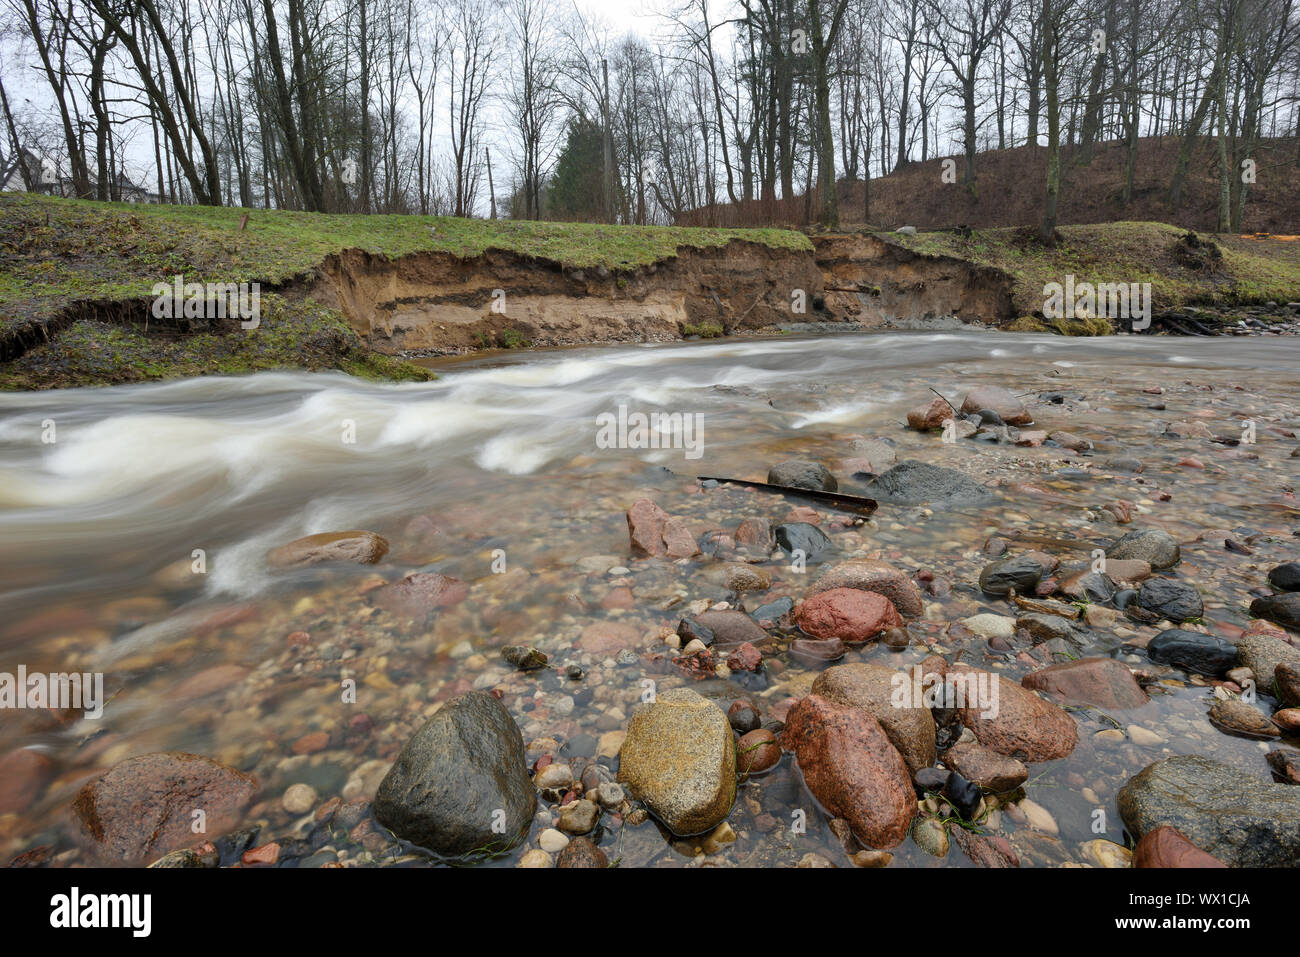 Natural erosion, shore of wild forest river Stock Photo